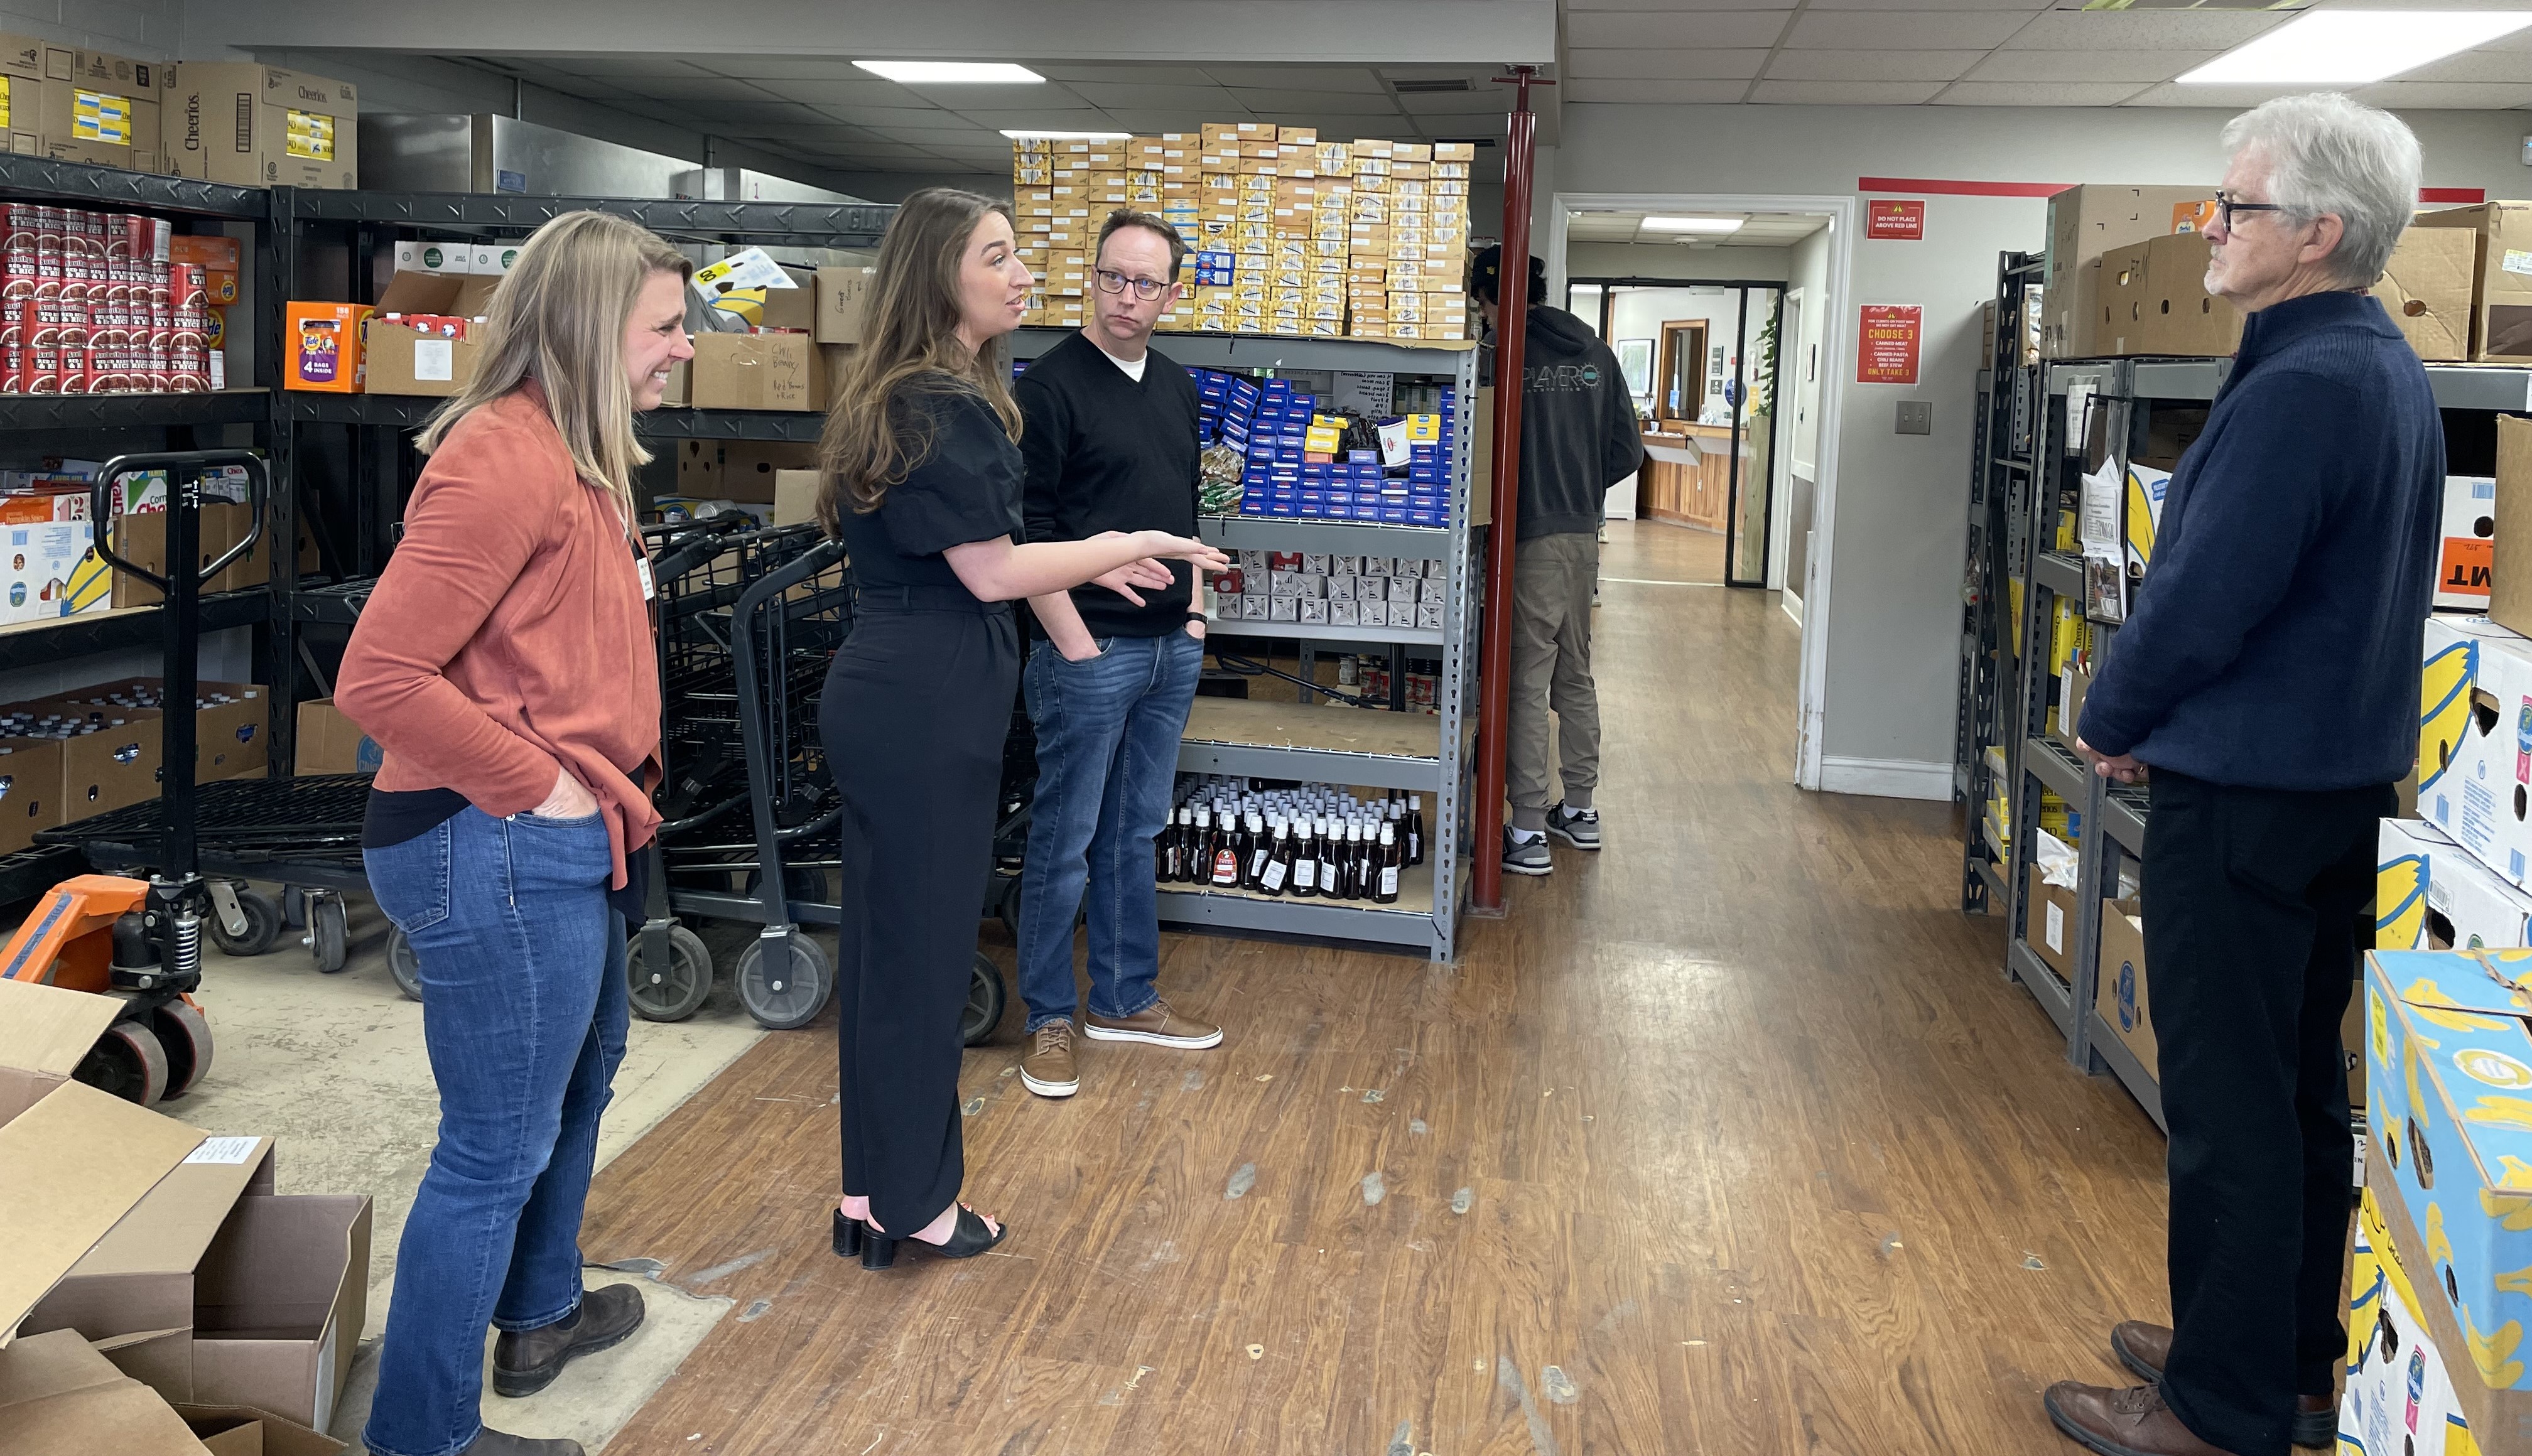 Pictured here, WCCF advisory board member David Harman (right) and NCCF Community Leadership Officer Colby Martin toured the facility with Maura McClain, Director of Strategic Initiatives, and Jenn Bass, Executive Director.